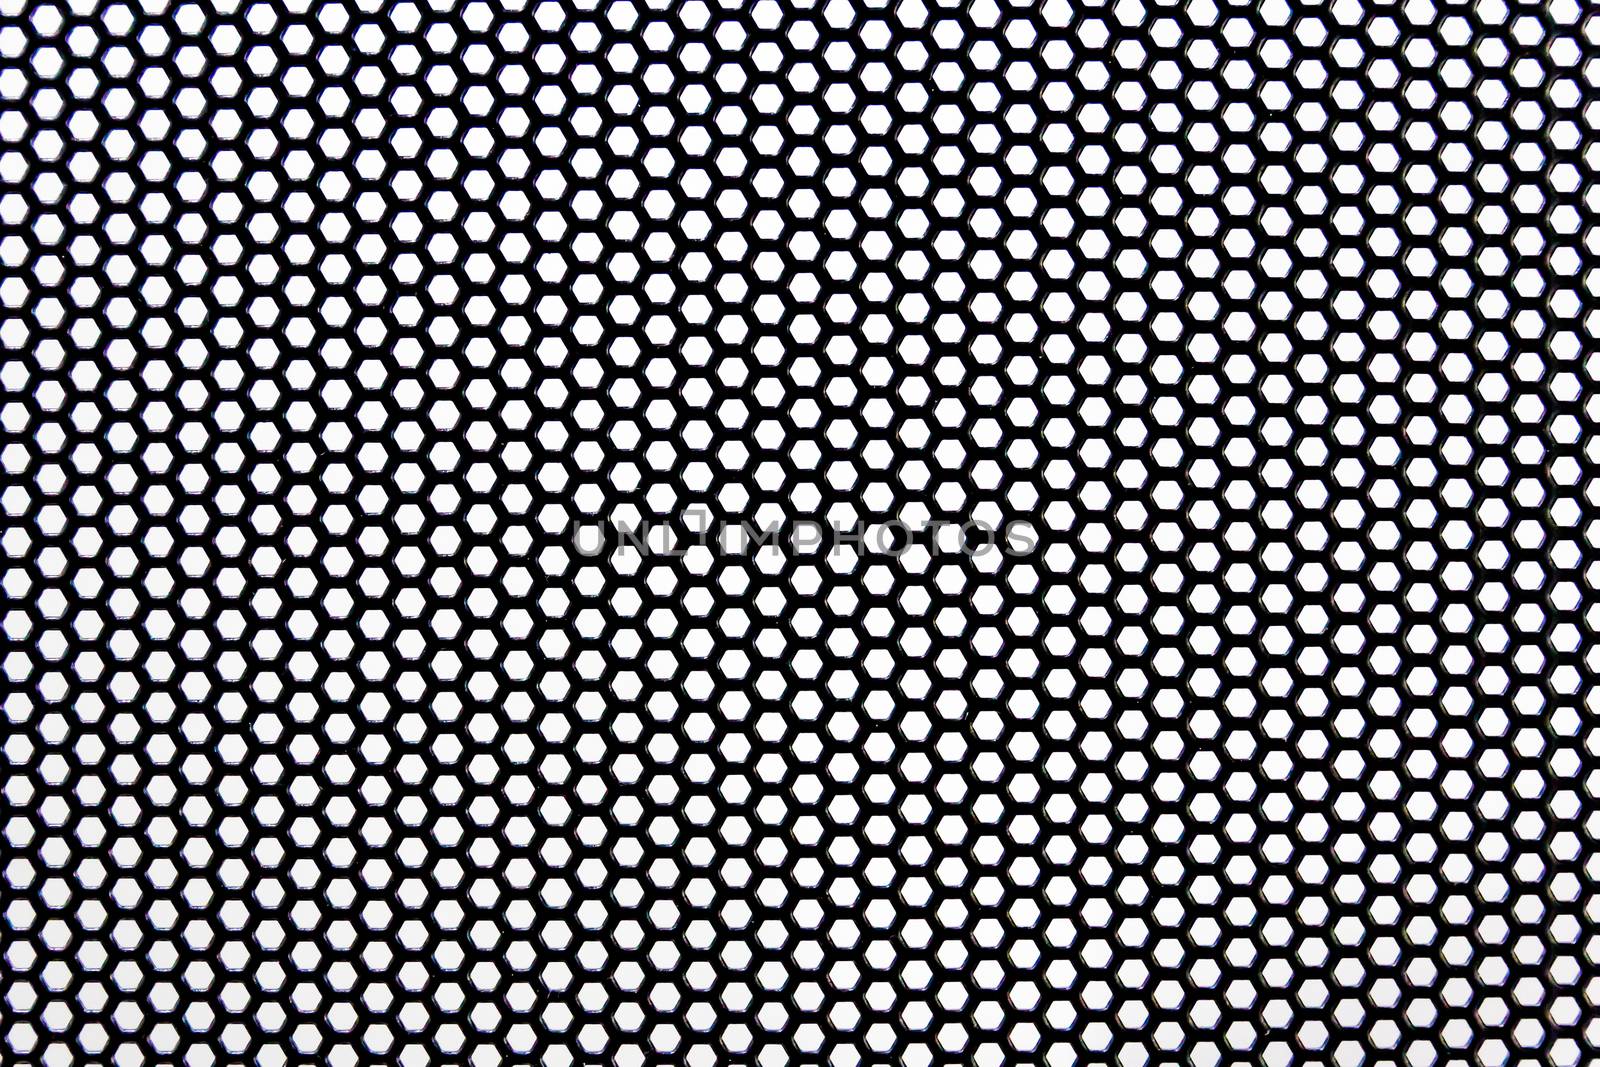 Grate with holes.The image circle tiled images.